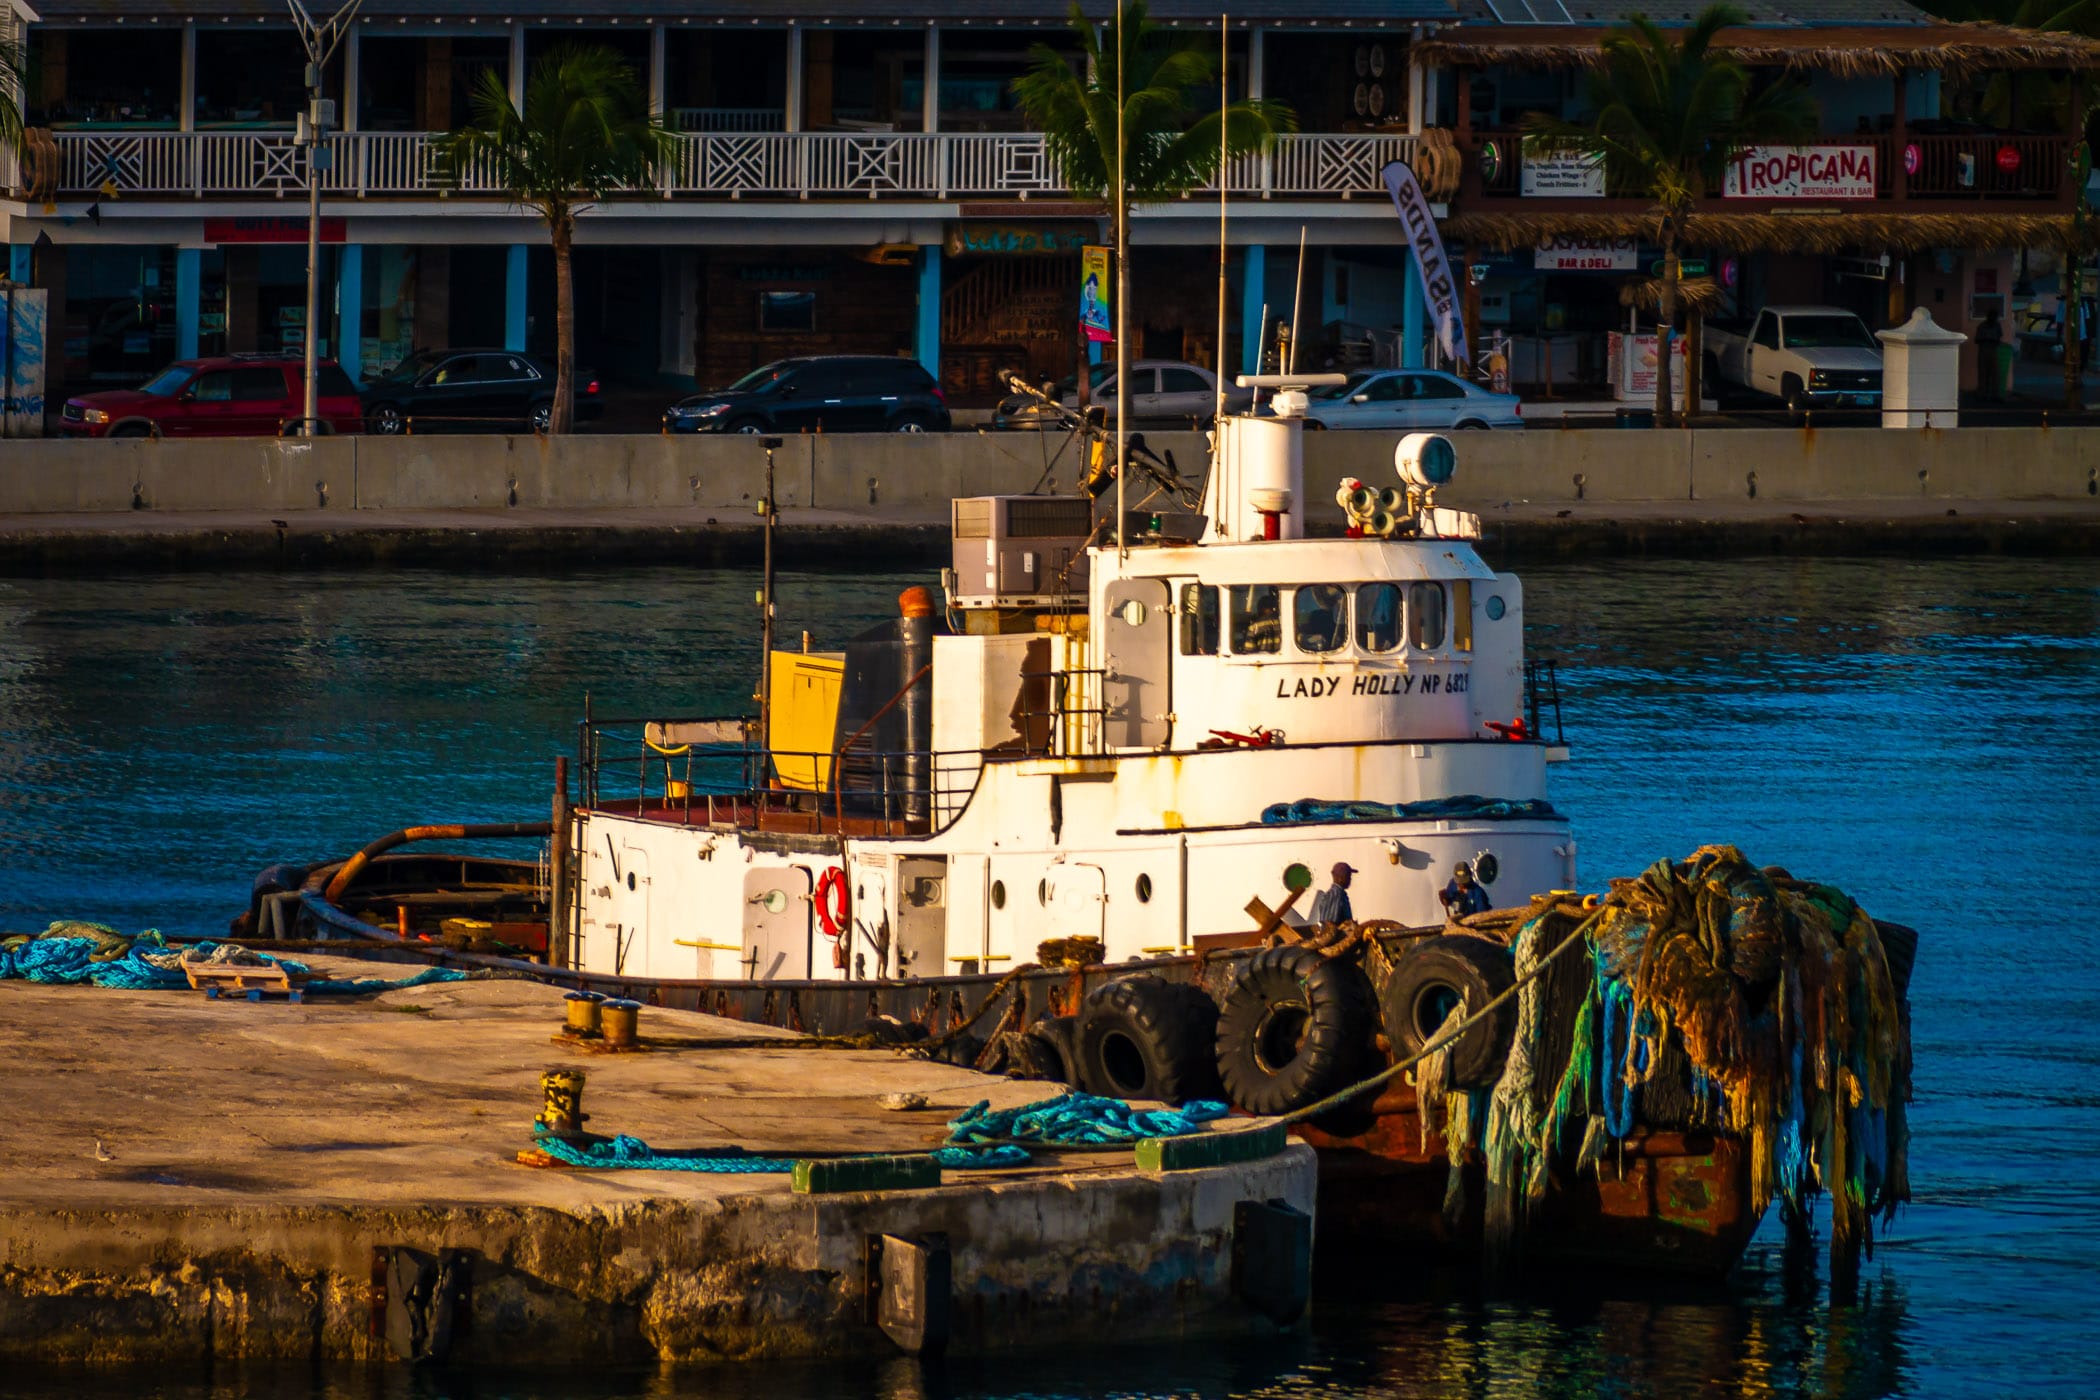 An old tugboat readies to go to work for the day in the harbour at Nassau, Bahamas.